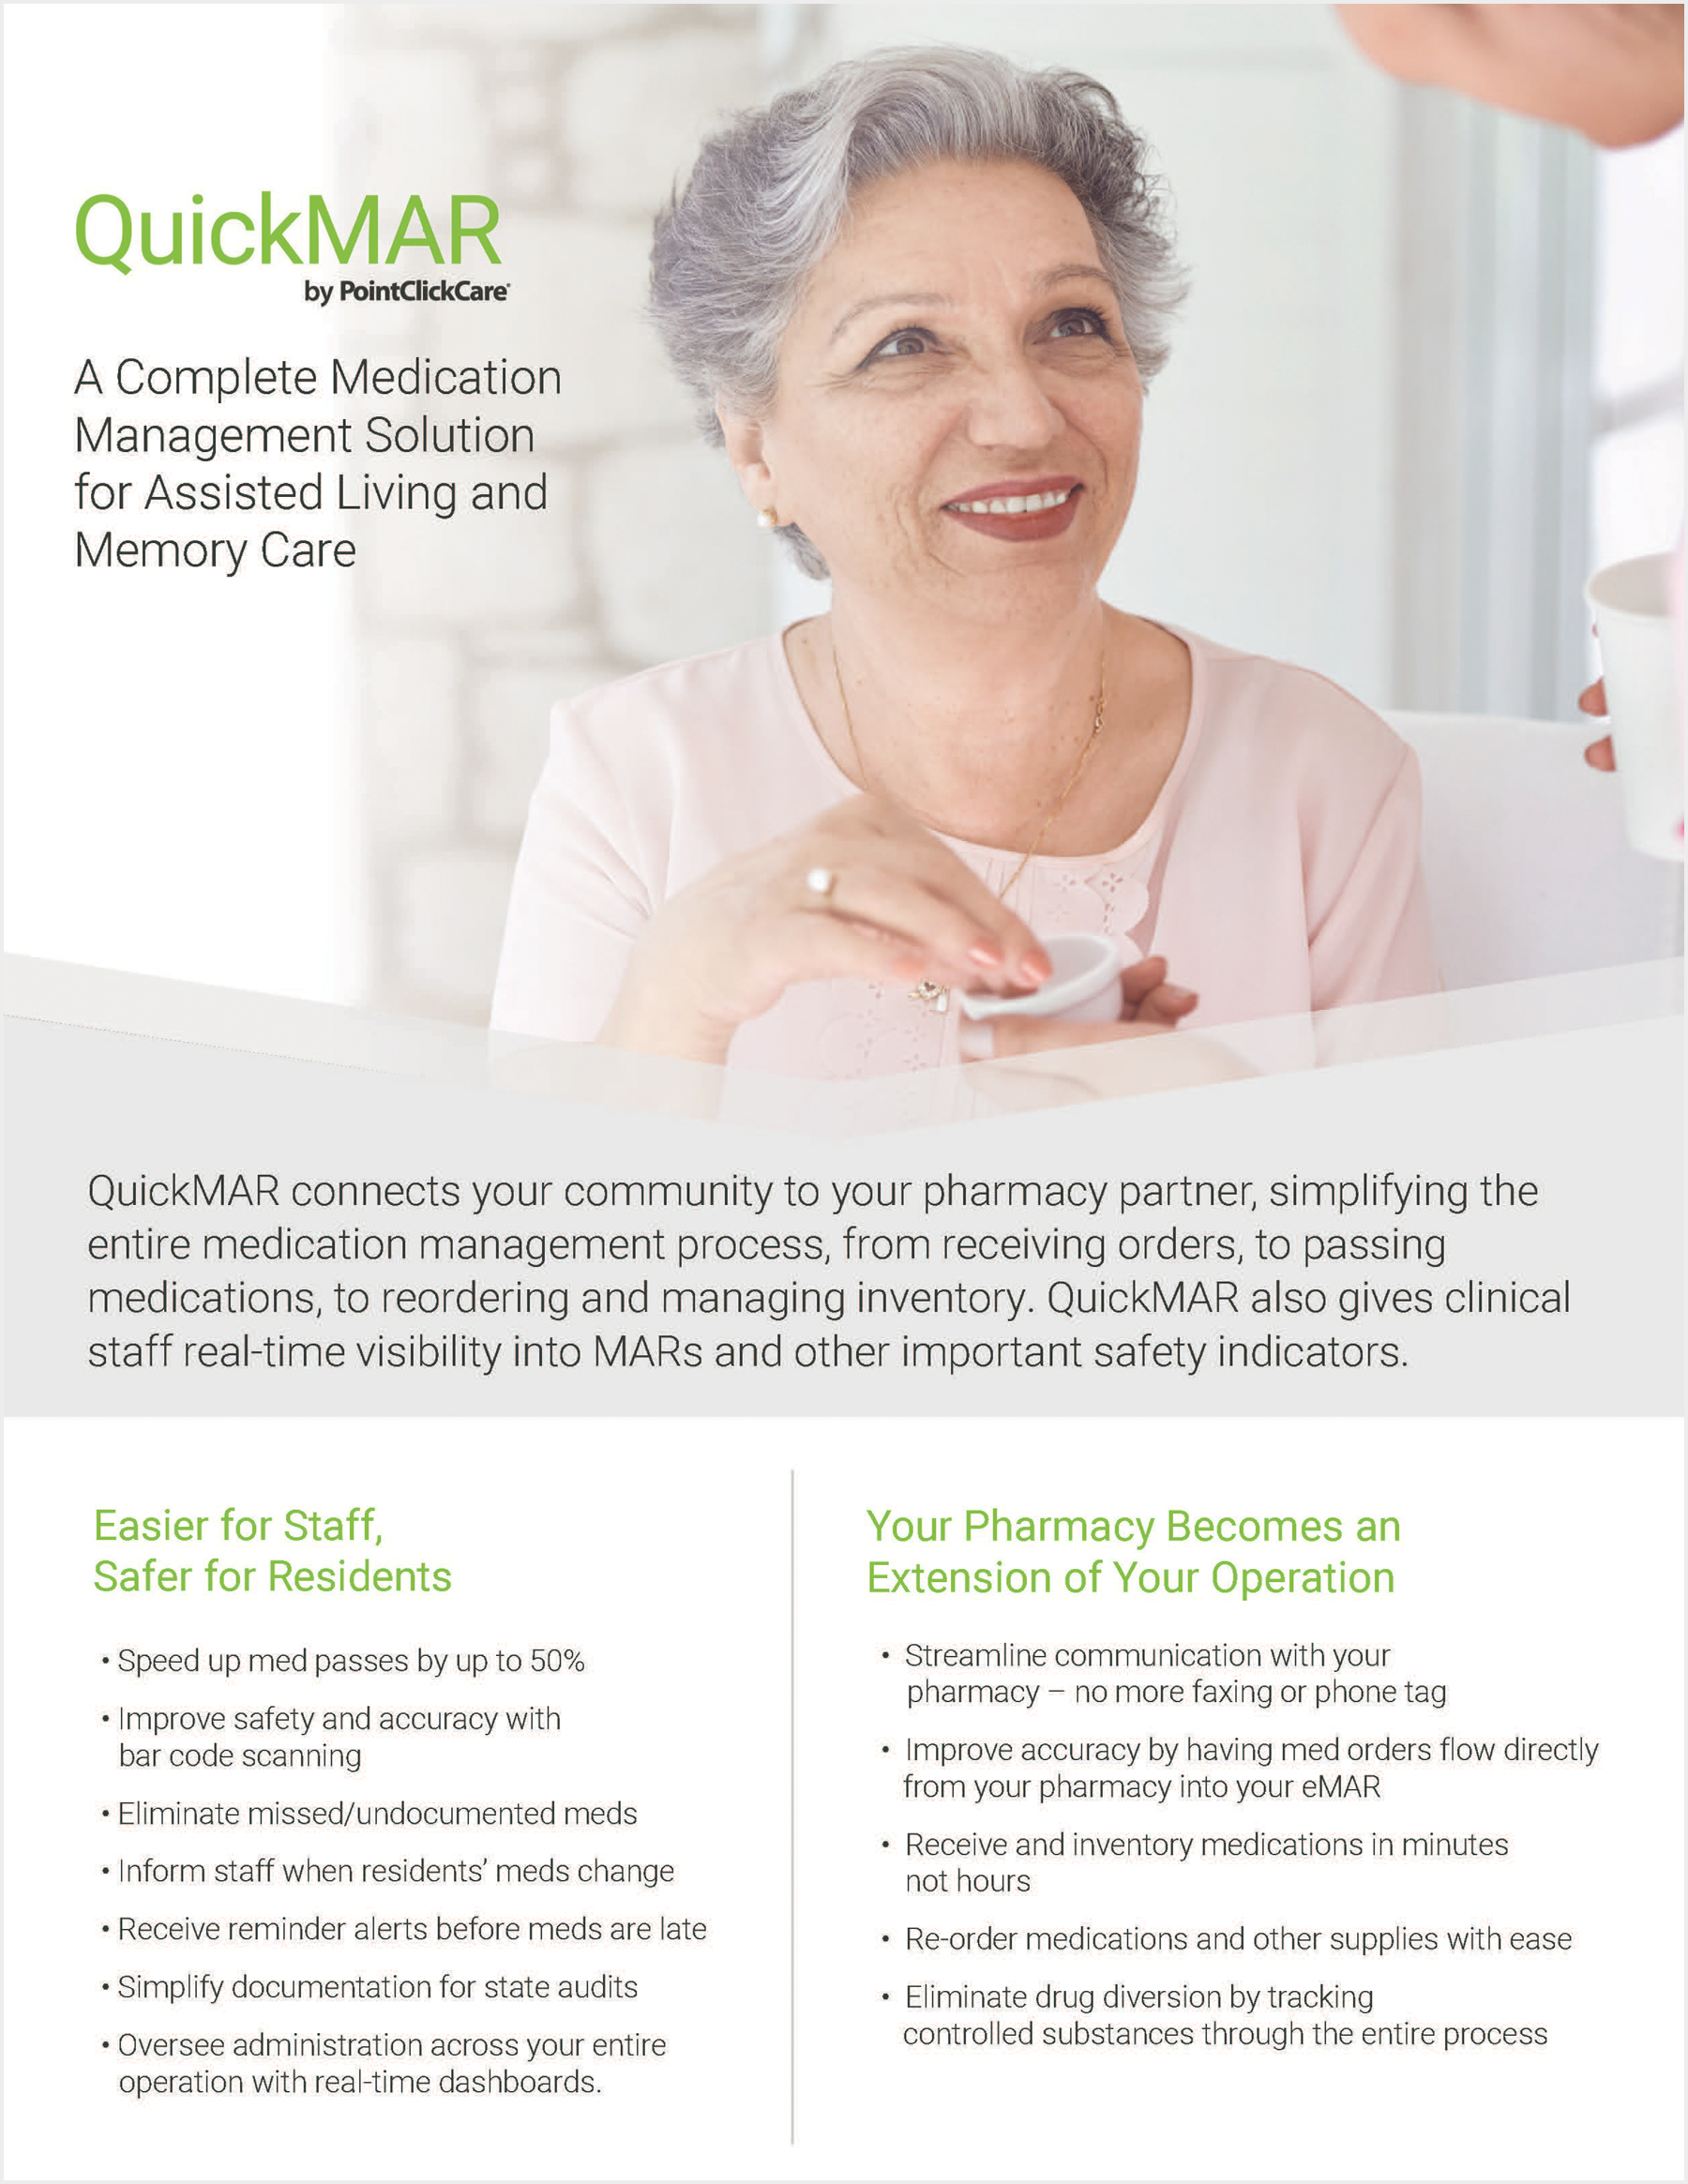 A Complete Medication Management Solution for Assisted Living and Memory Care PDF cover page